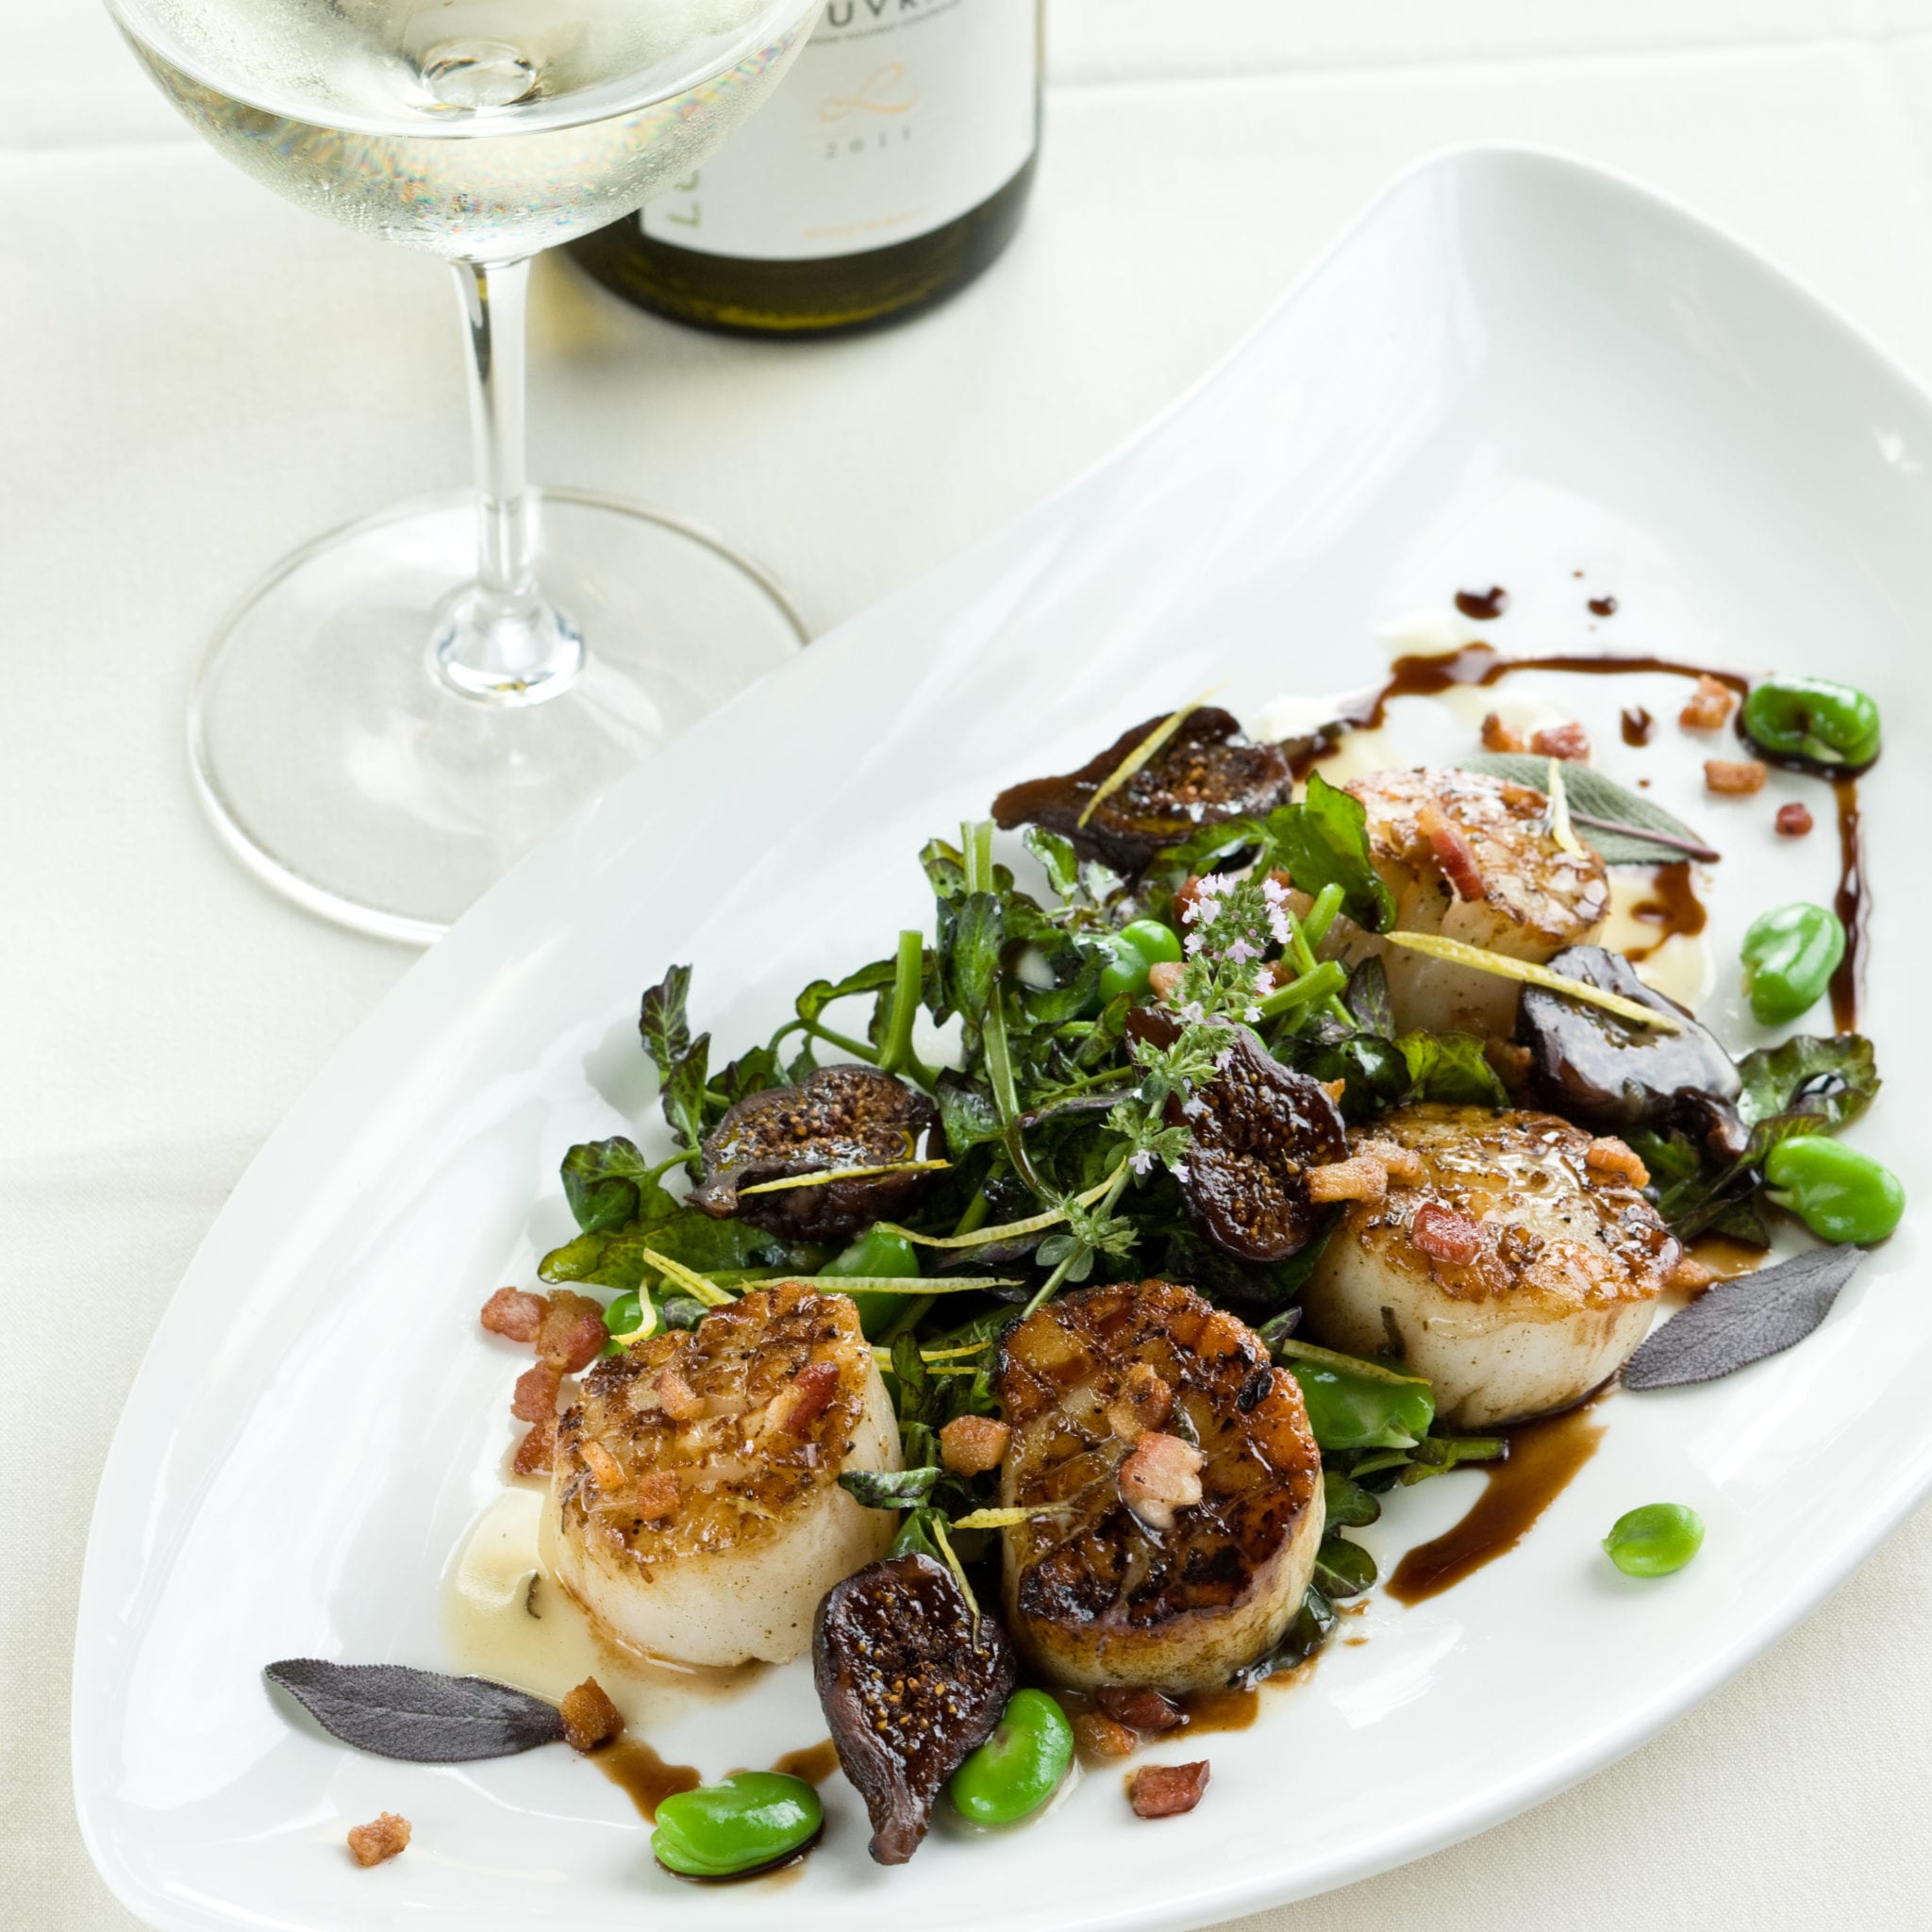 Seared-Diver-Scallops-with-Caramelized-Fig-Bentons-Bacon-Fava-Beans-and-Sage-Brown-Butter.jpg